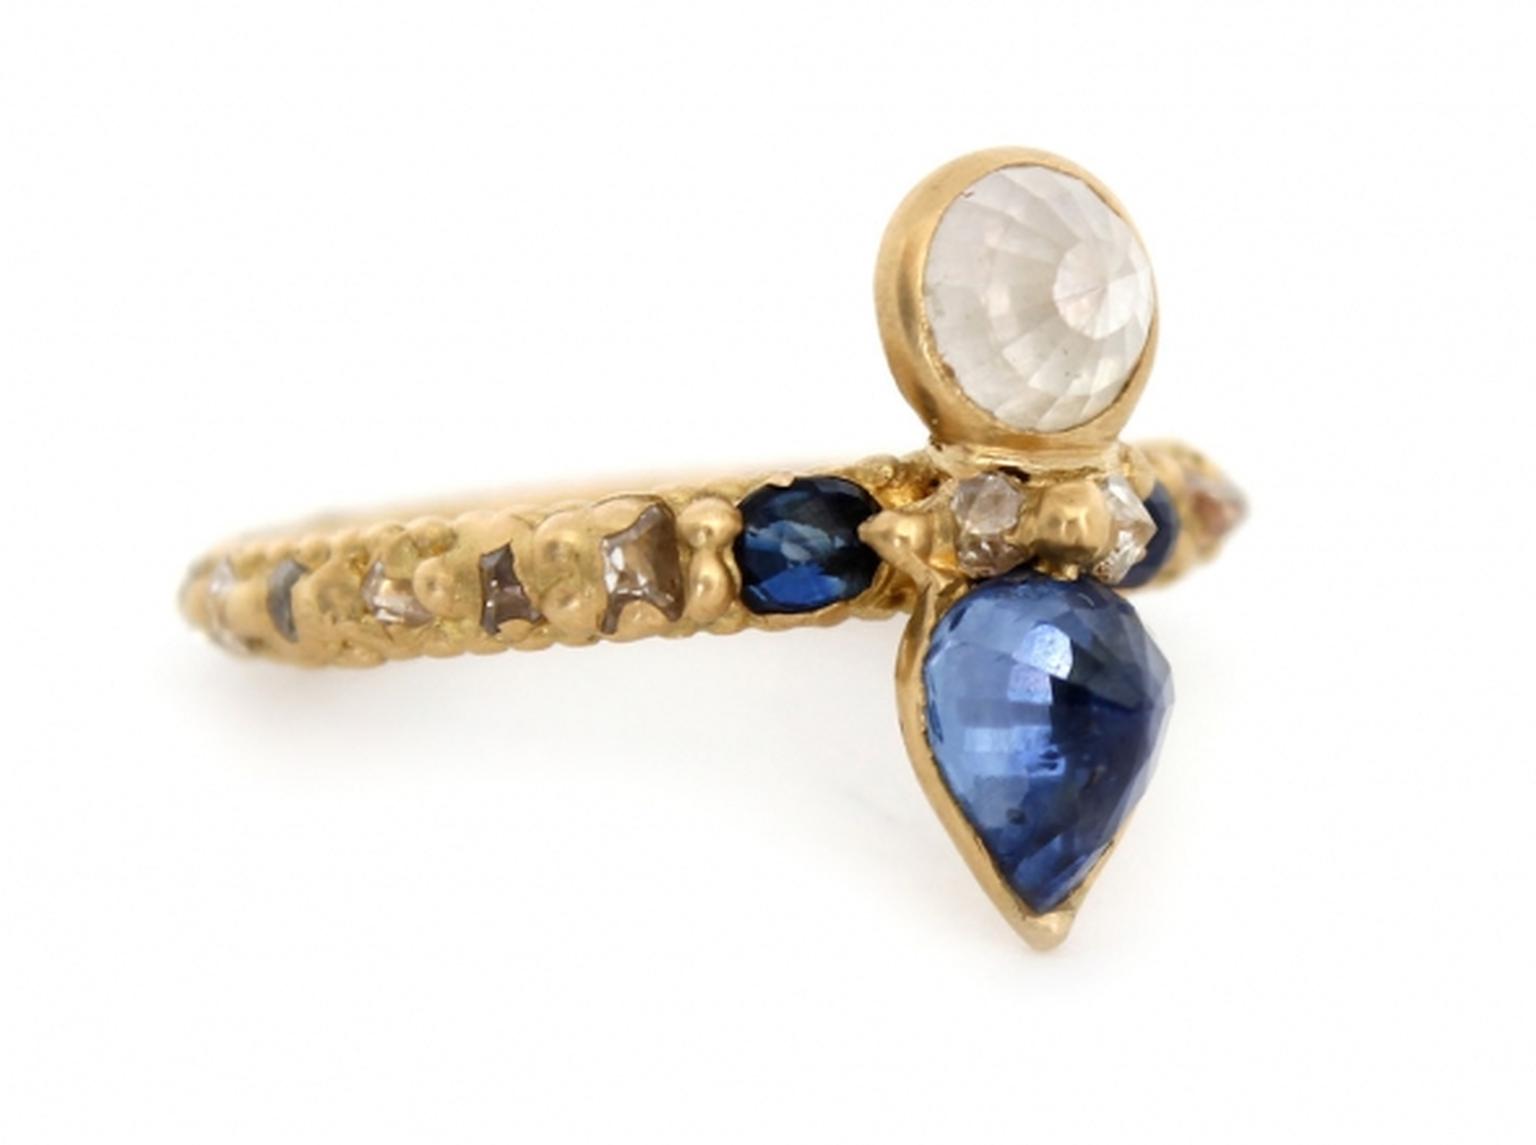 Polly Wales Crowned Moon Beetle ring, set with a white rose-cut diamond above a pear-shaped rose-cut sapphire (£6,380).